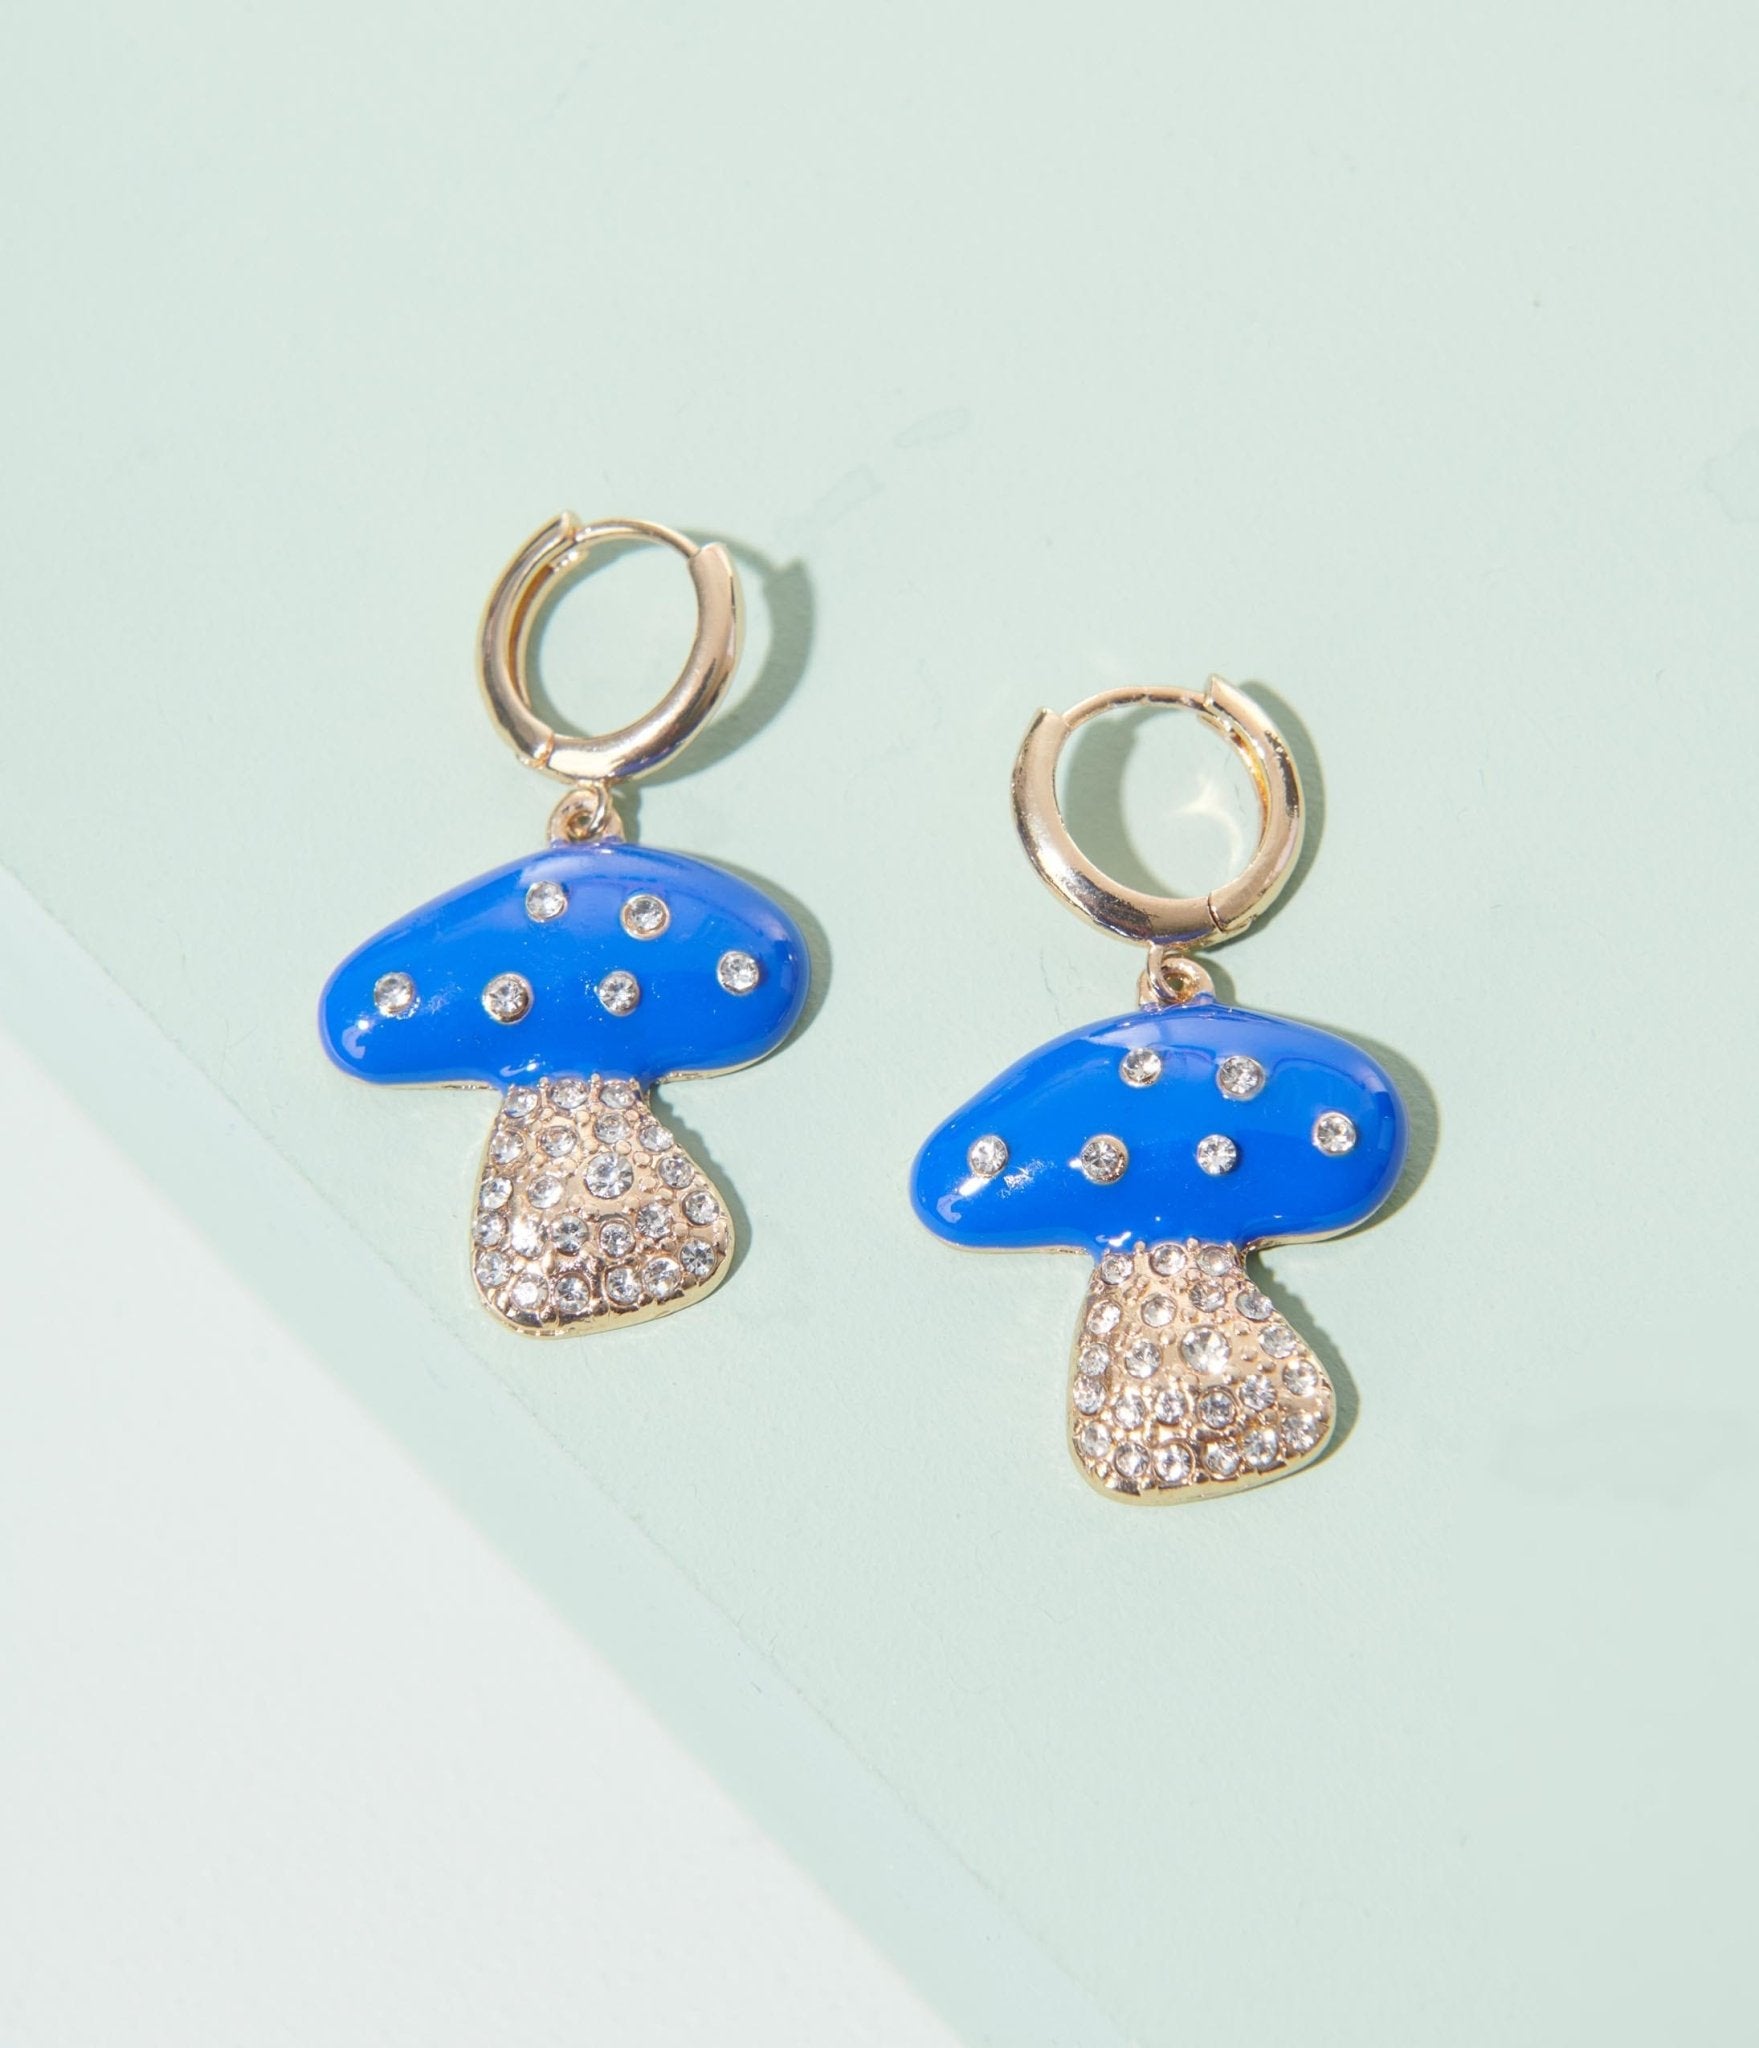 Gold and Blue Mushroom Earrings – Unique Vintage